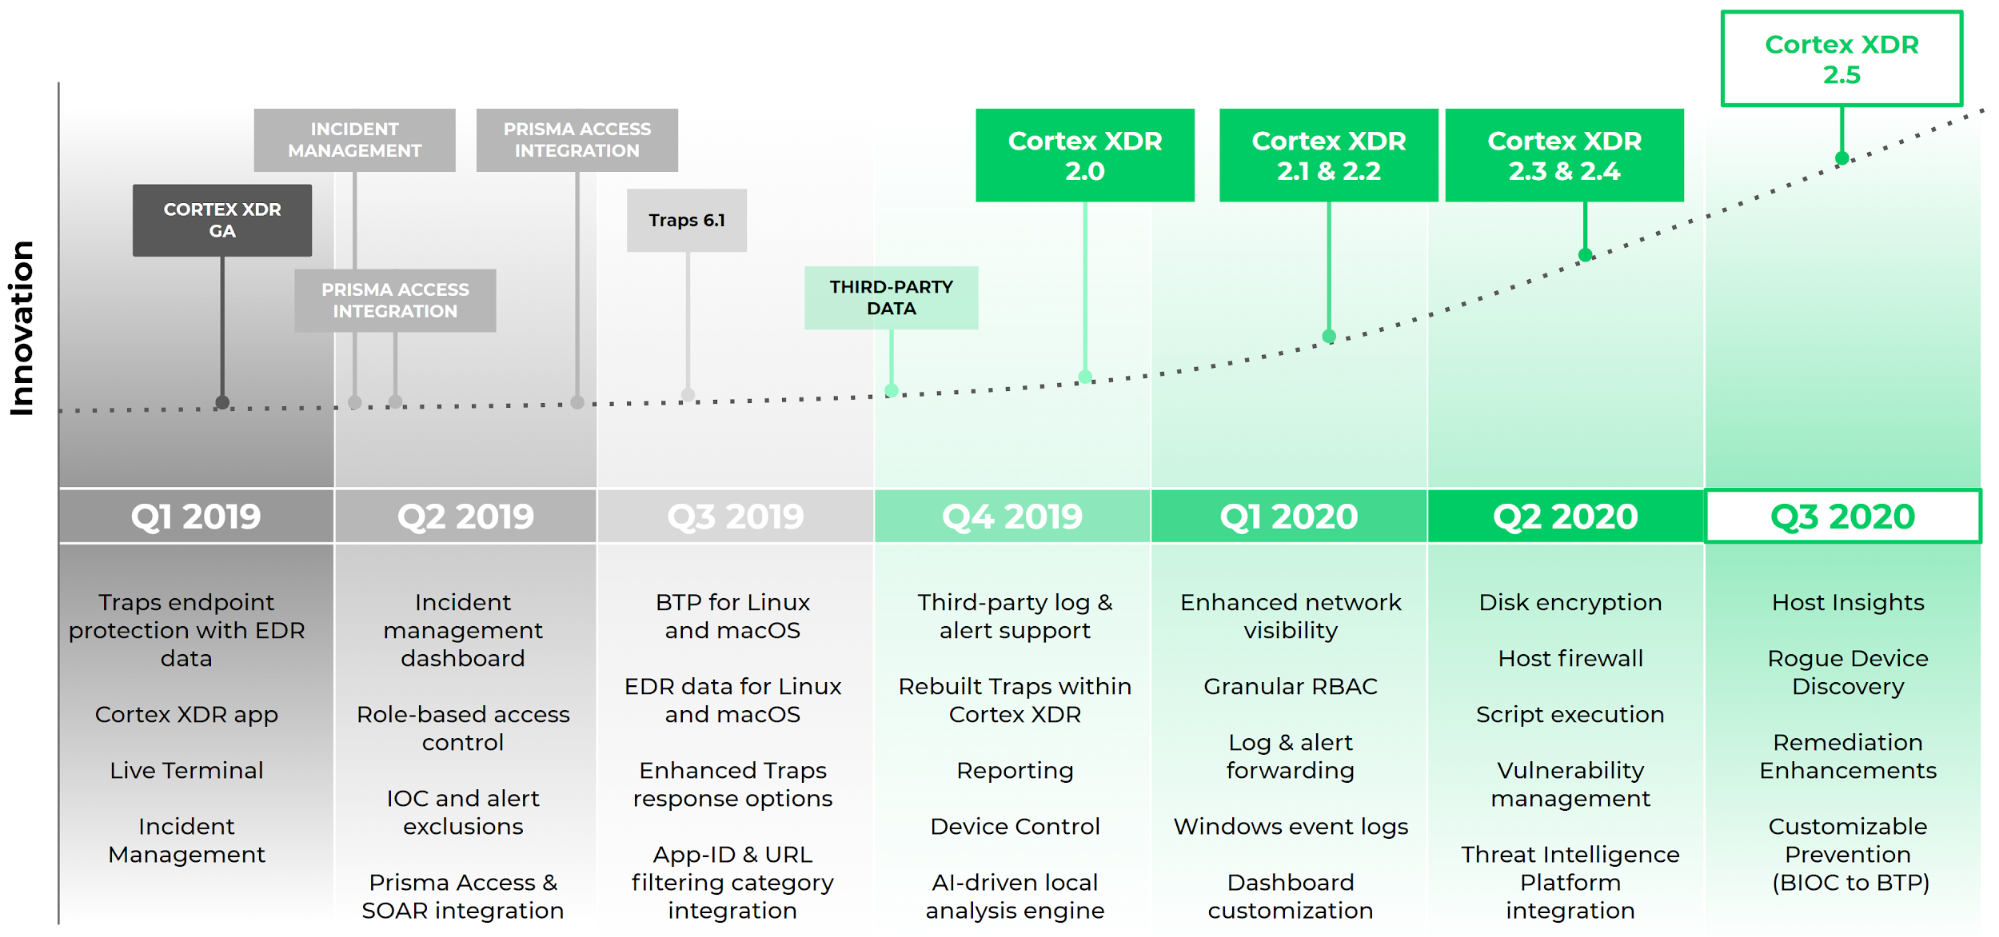 Our Rapid Pace of Innovation: The timeline shows a timeline of Cortex XDR releases, beginning with the Cortex XDR GA in Q1 2019, going up until the launch of Cortex XDR 2.5 in Q3 2020.